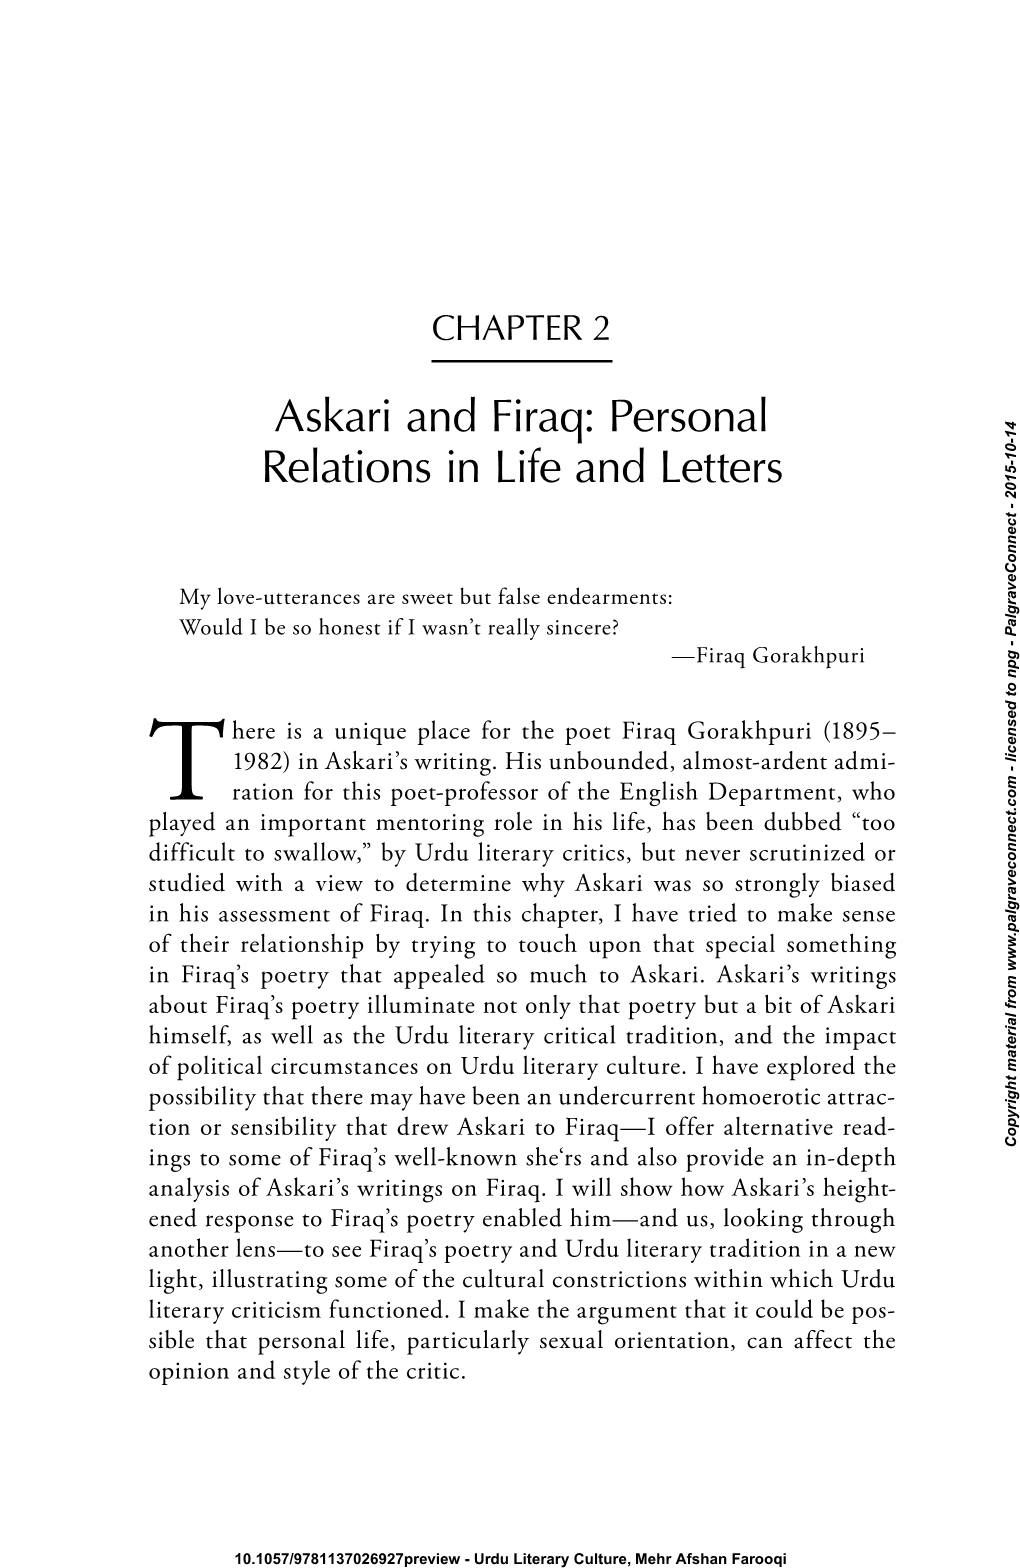 Askari and Firaq: Personal Relations in Life and Letters